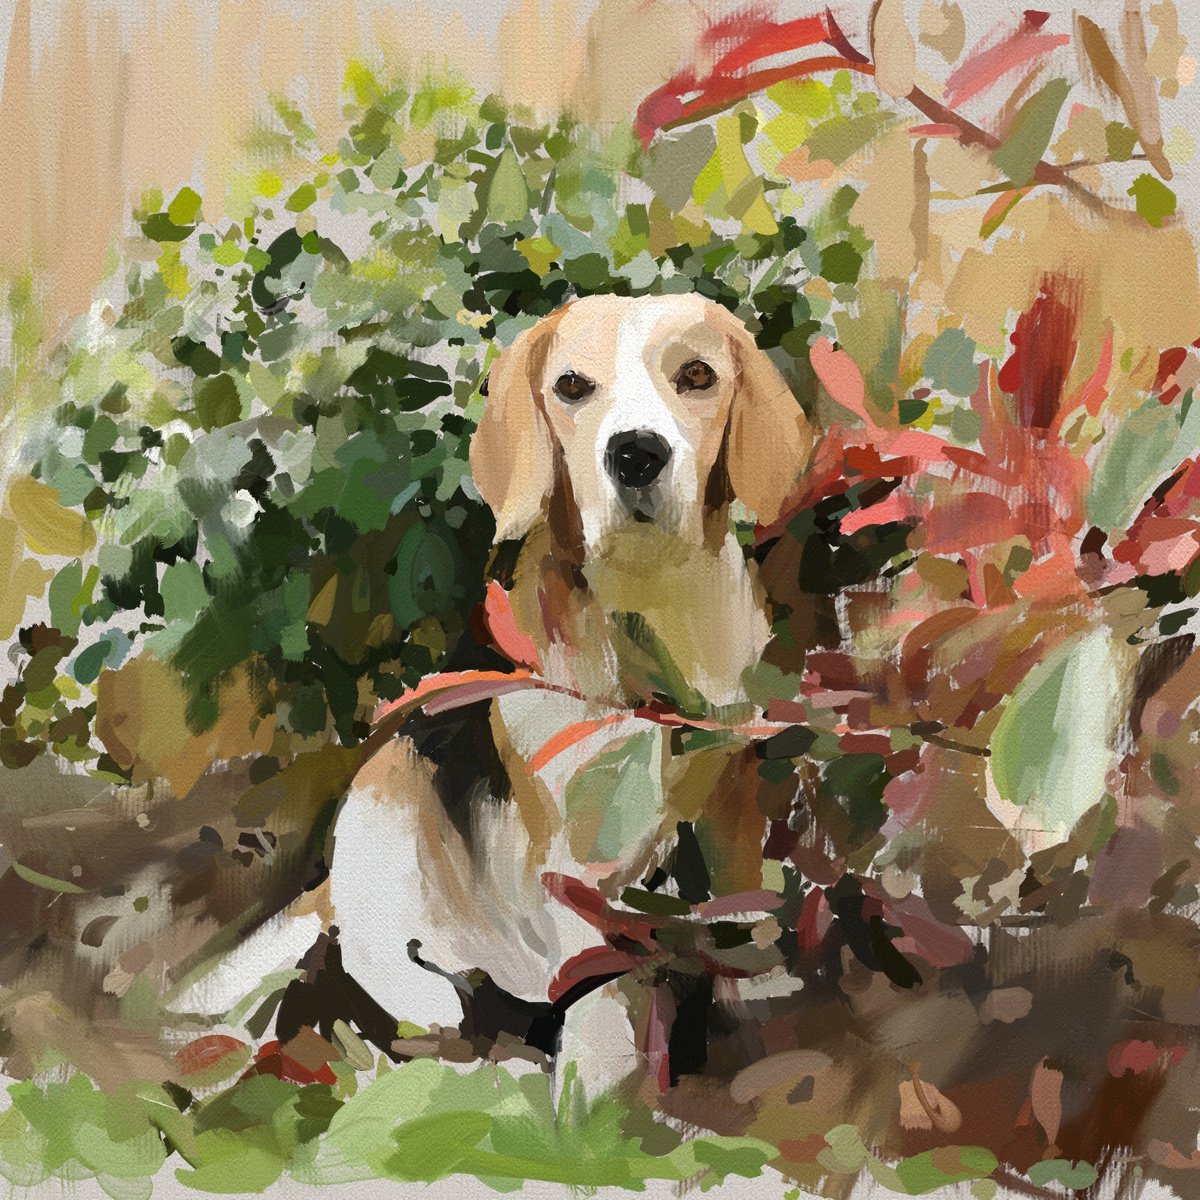 Rupert Amongst the Plants (Limited Edition) by Anna Bush